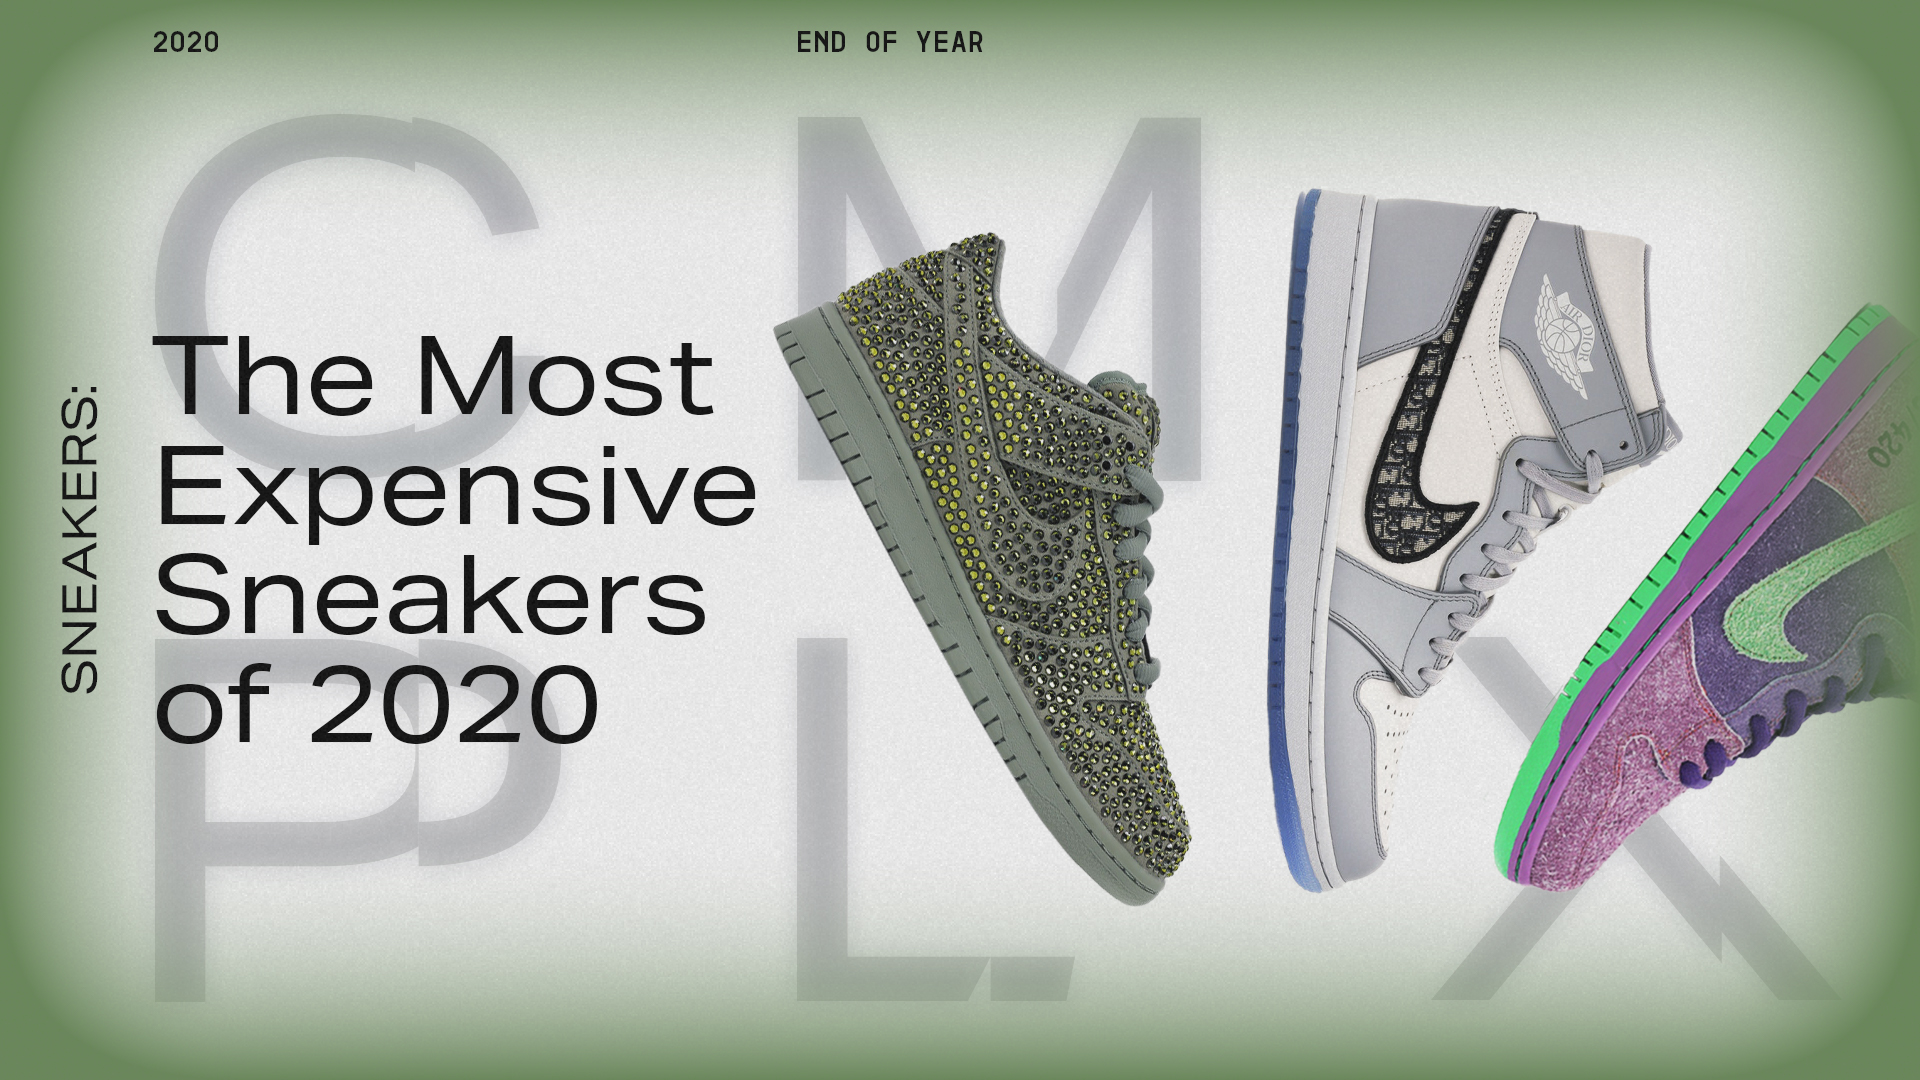 7 Most Expensive Nike Shoes 